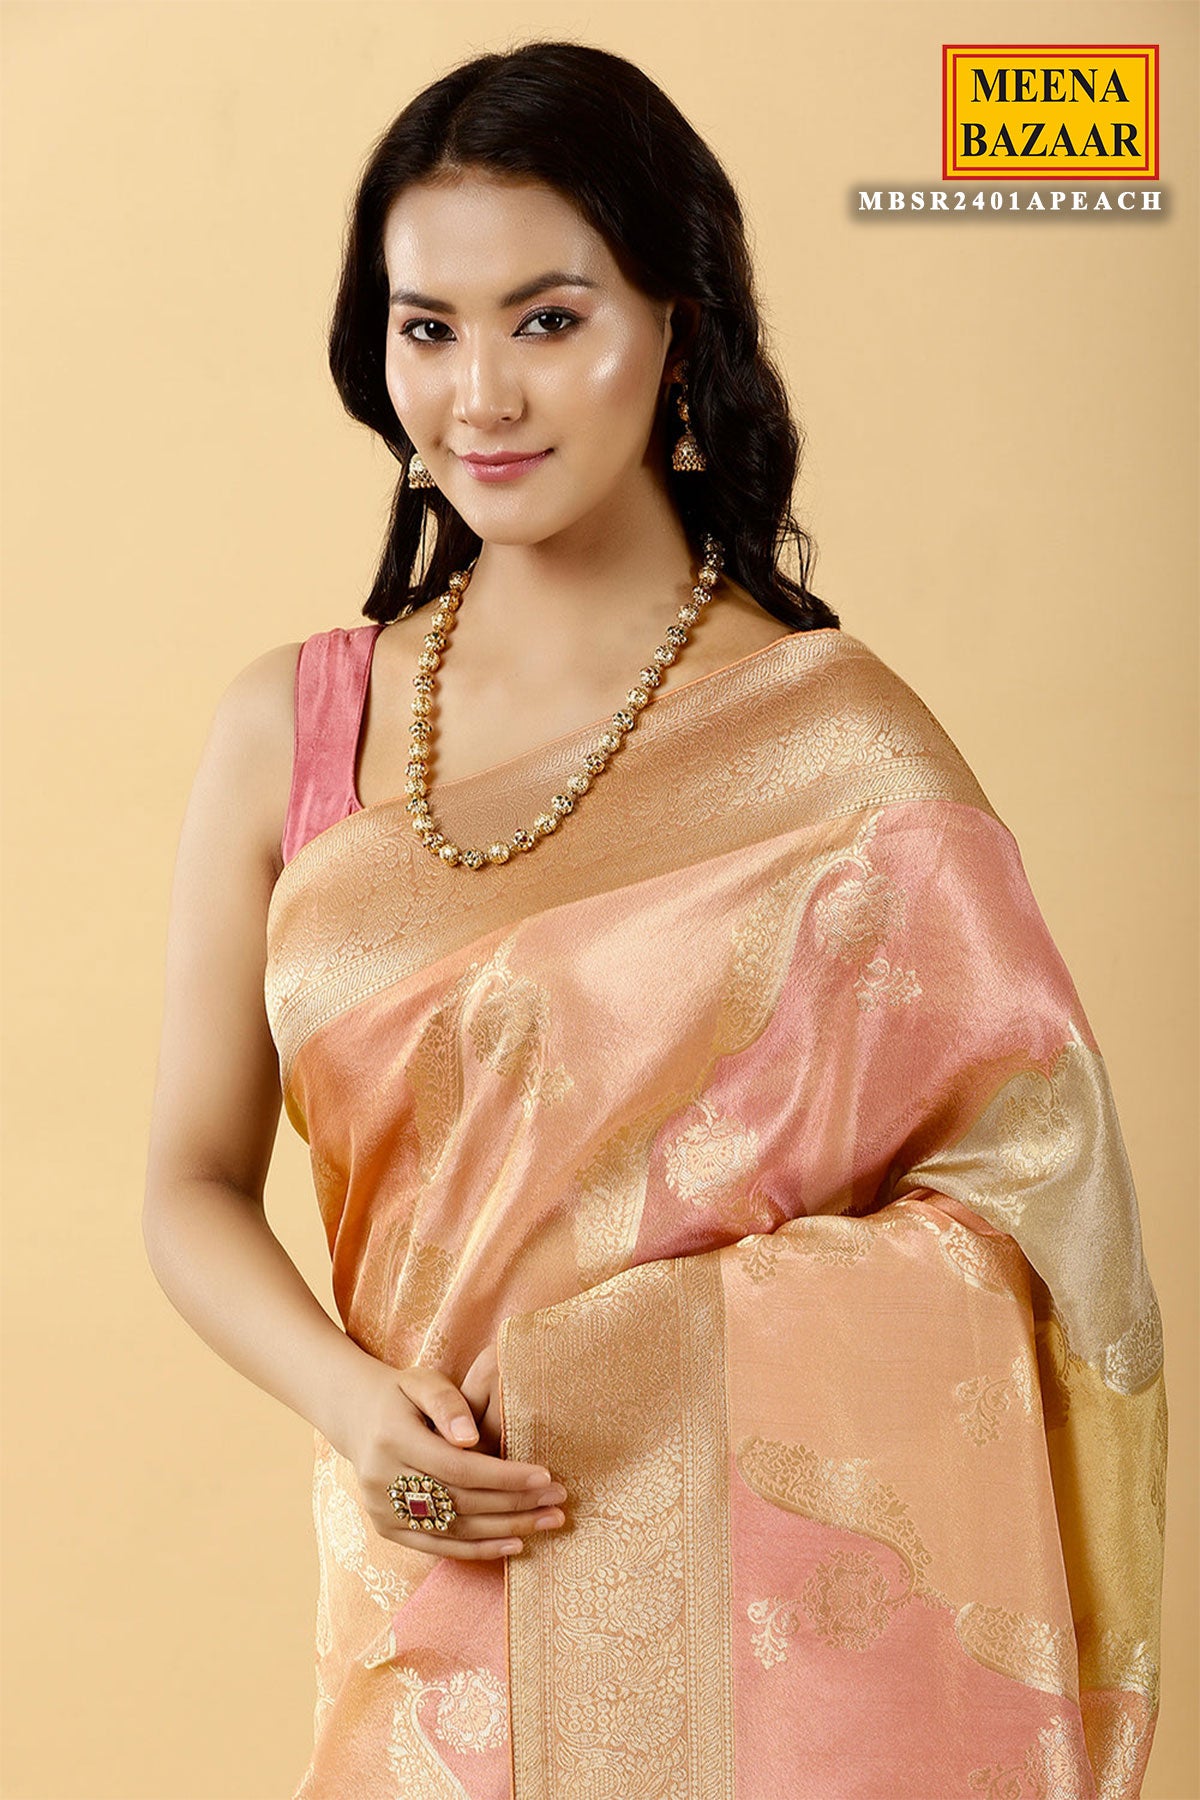 Peach Georgette Paisley and Floral Motif Zari Woven Saree